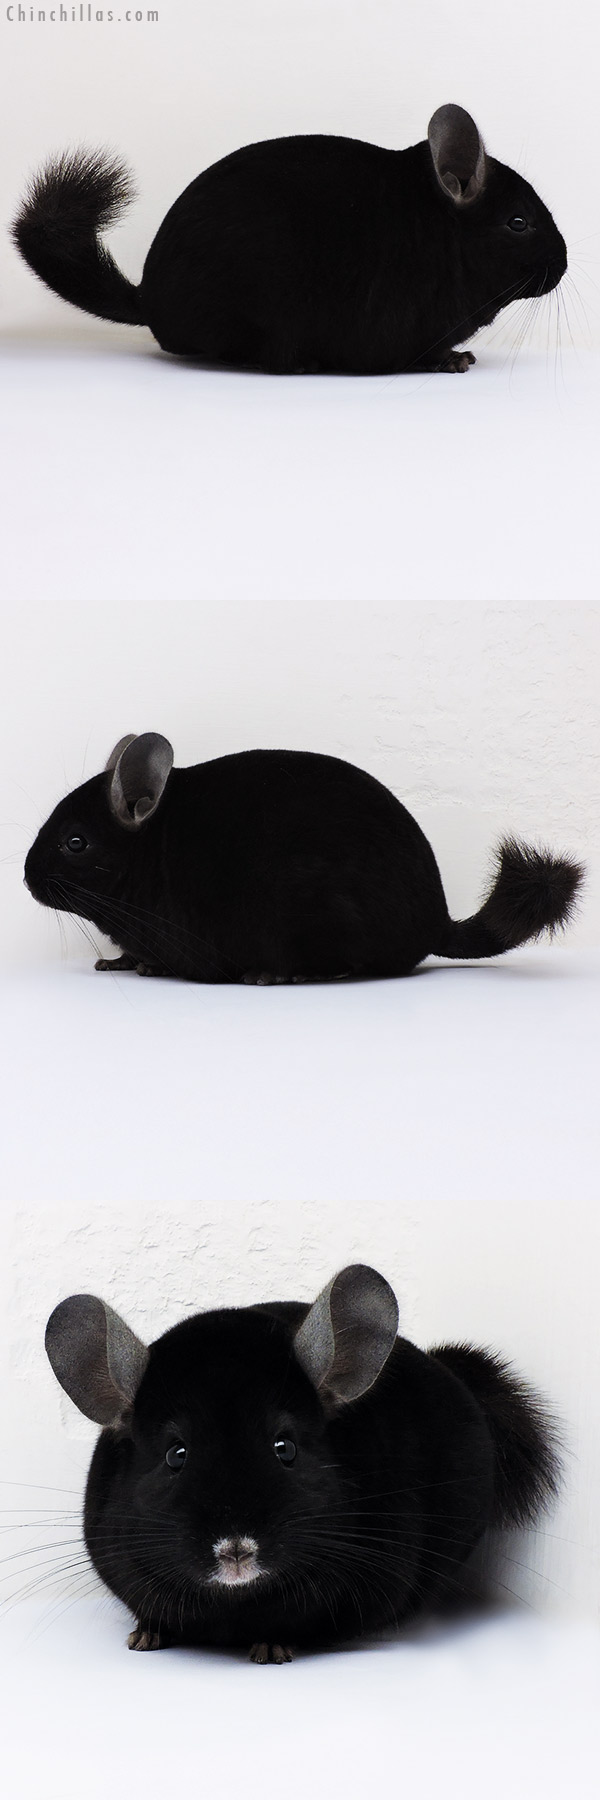 Chinchilla or related item offered for sale or export on Chinchillas.com - 16215 Herd Improvement Quality Ebony Male Chinchilla